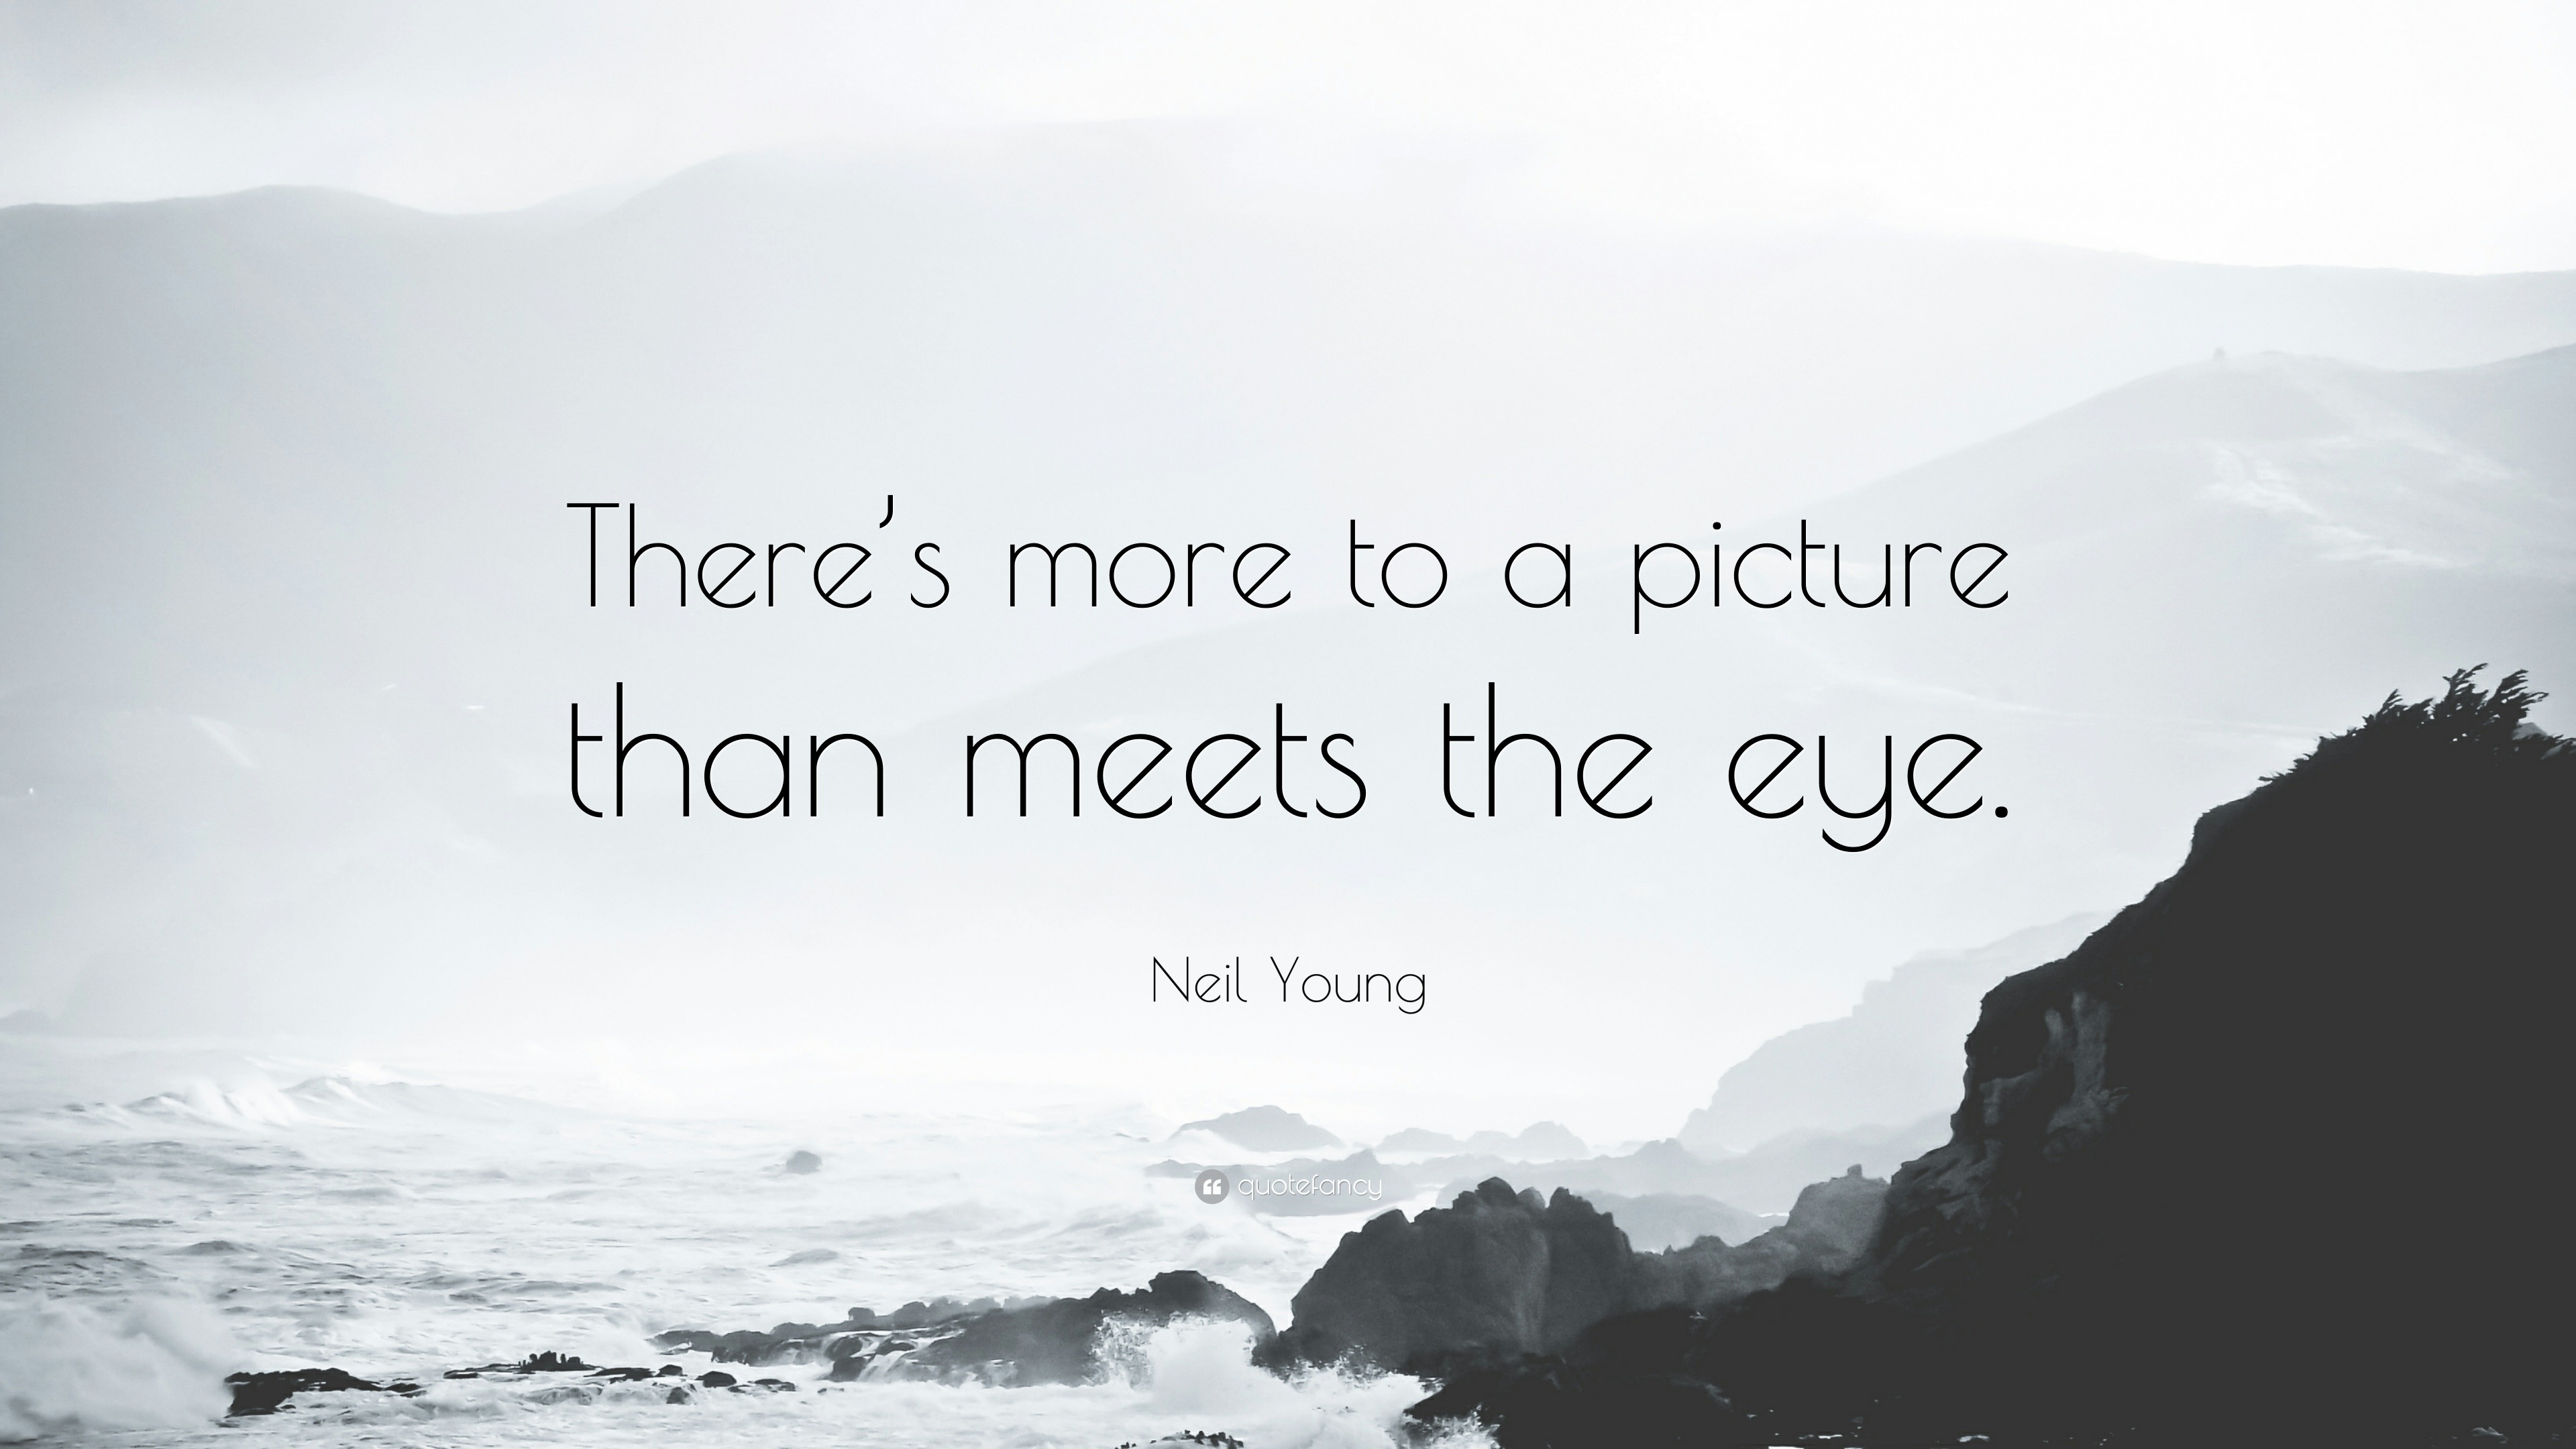 There is more to the picture than meets the eye